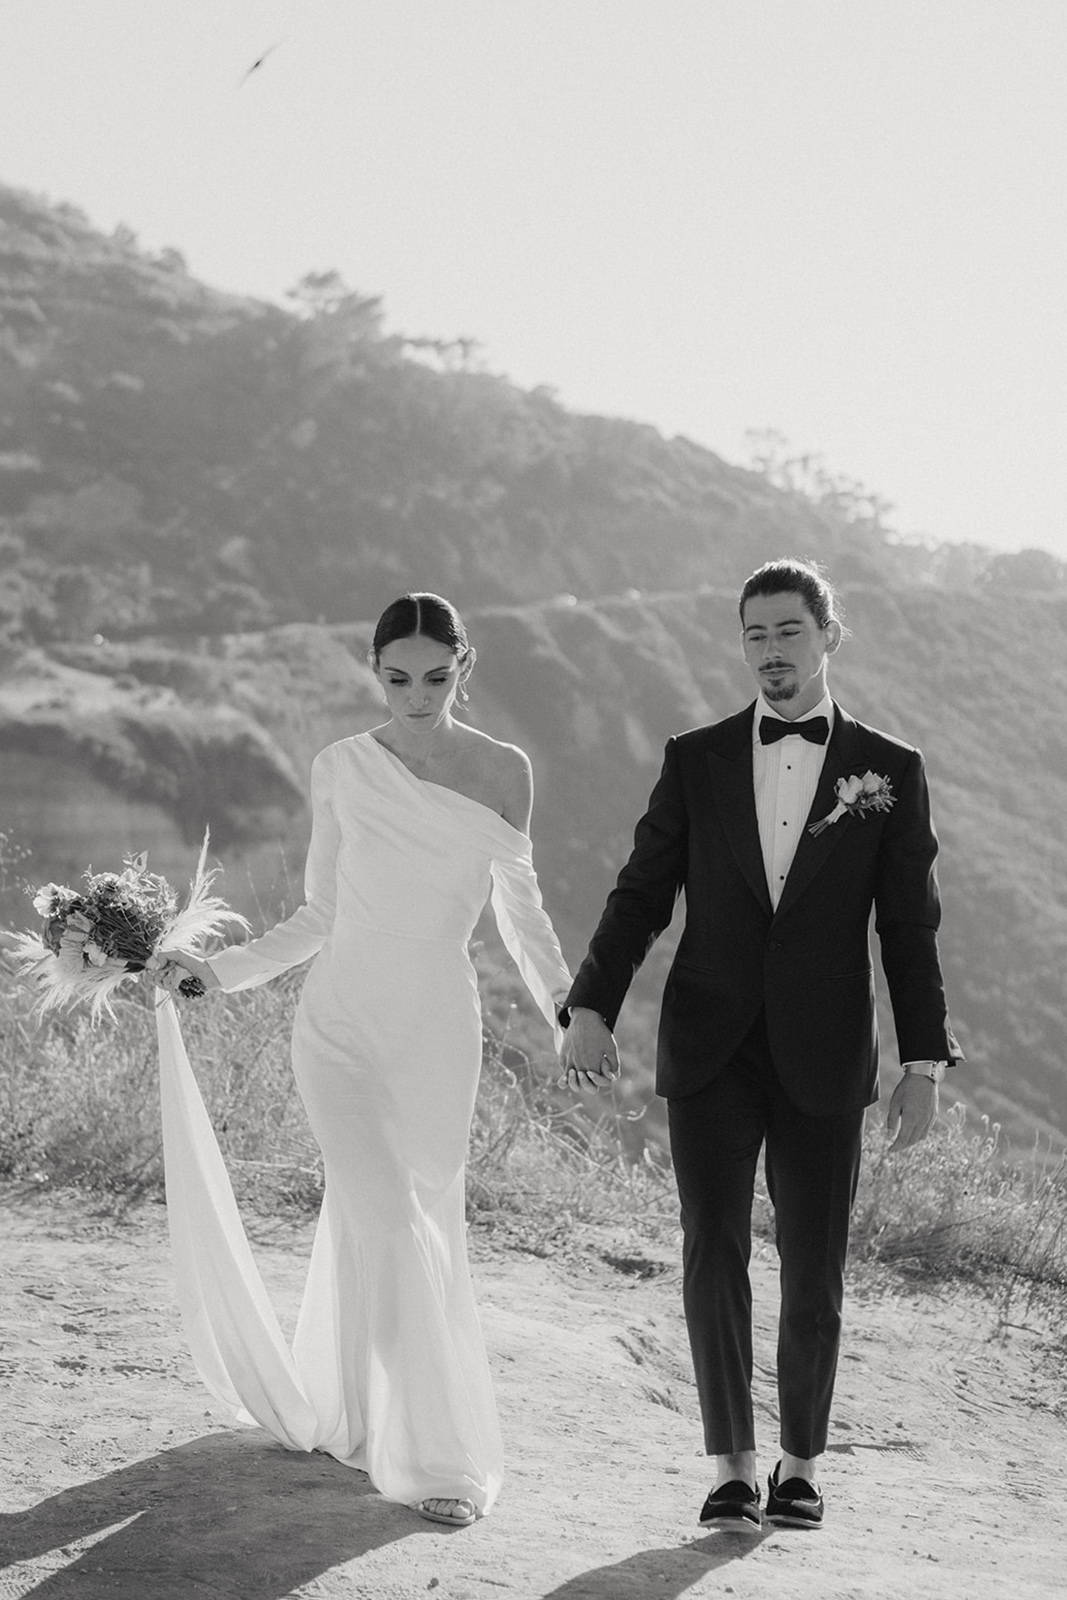 Bride and groom walking together with a coastal background